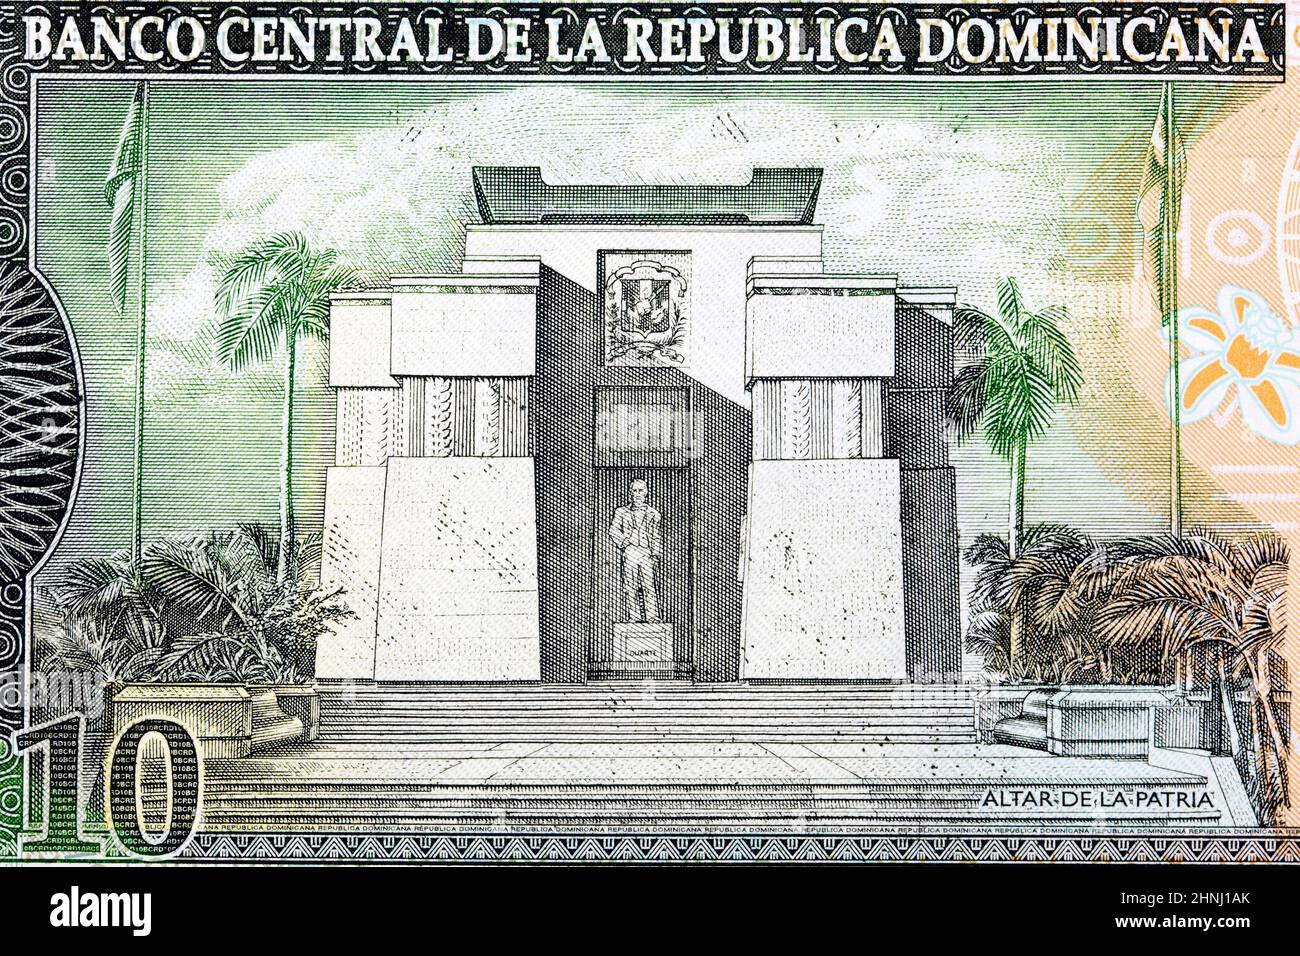 Altar of the Fatherland from old Dominican Republic money - Pesos Stock Photo